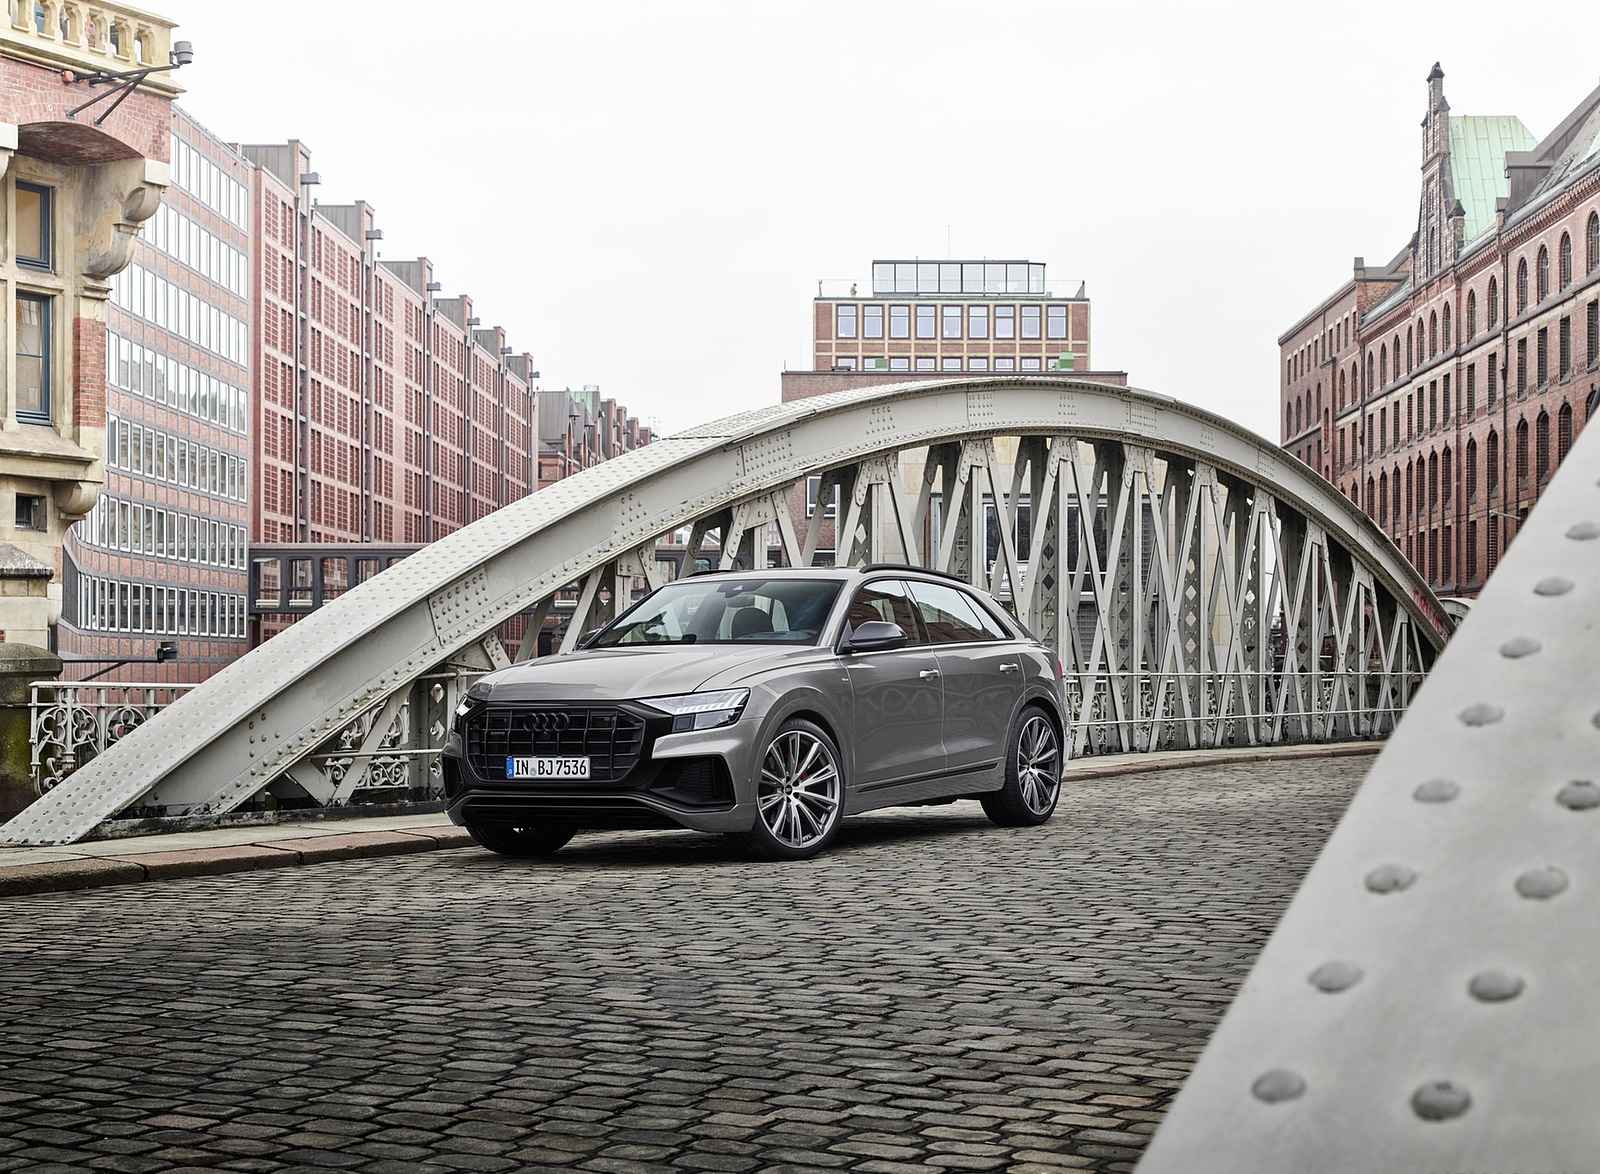 2022 Audi Q8 S Line Competition Plus (Color: Nardo Gray) Front Three-Quarter Wallpapers  #23 of 34